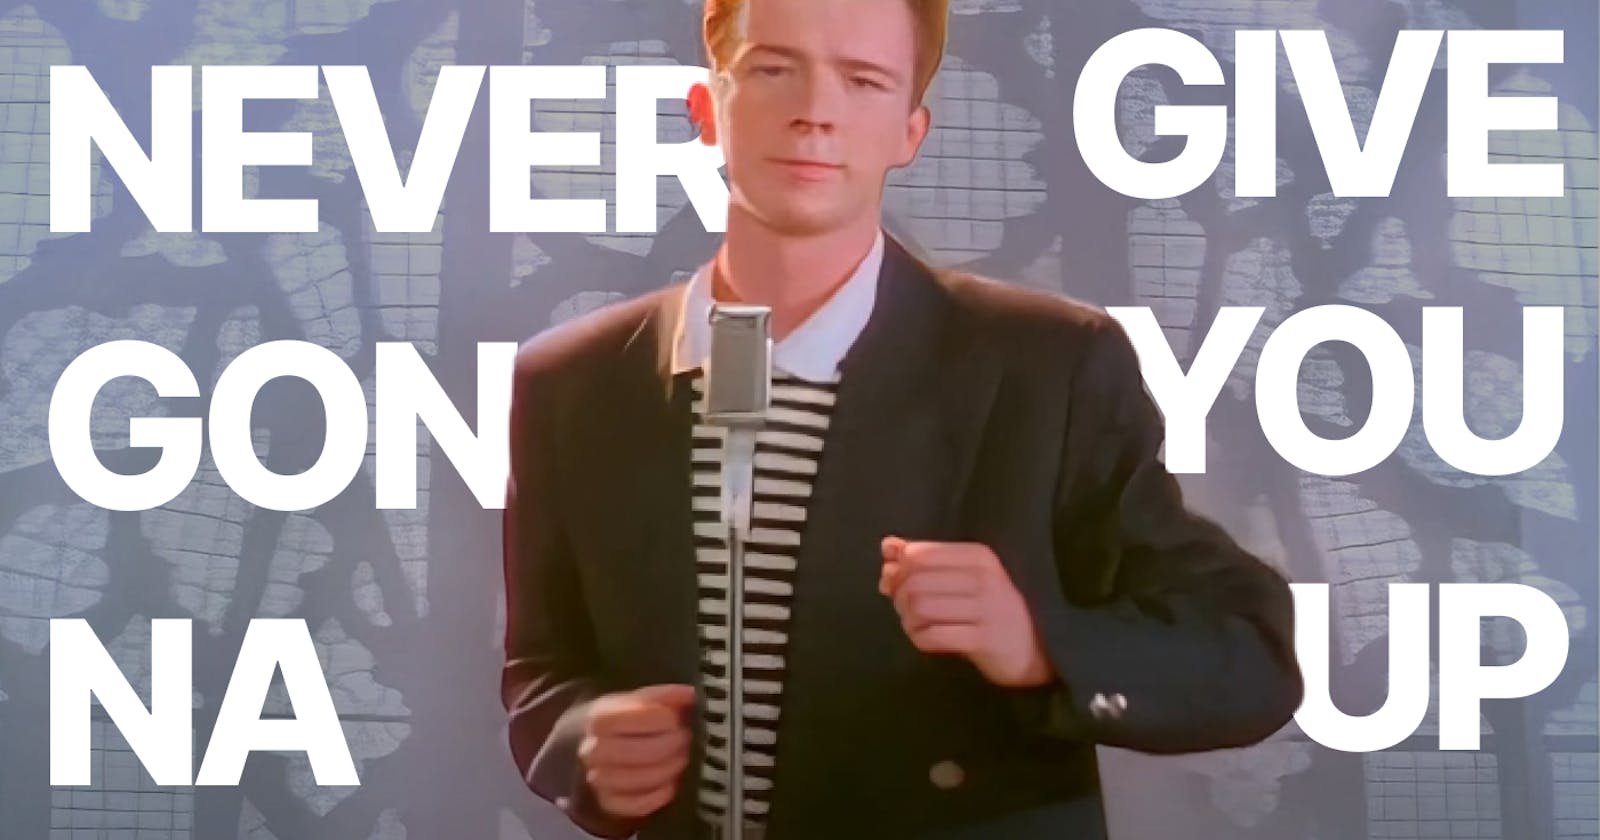 I made a website to rickroll my friends